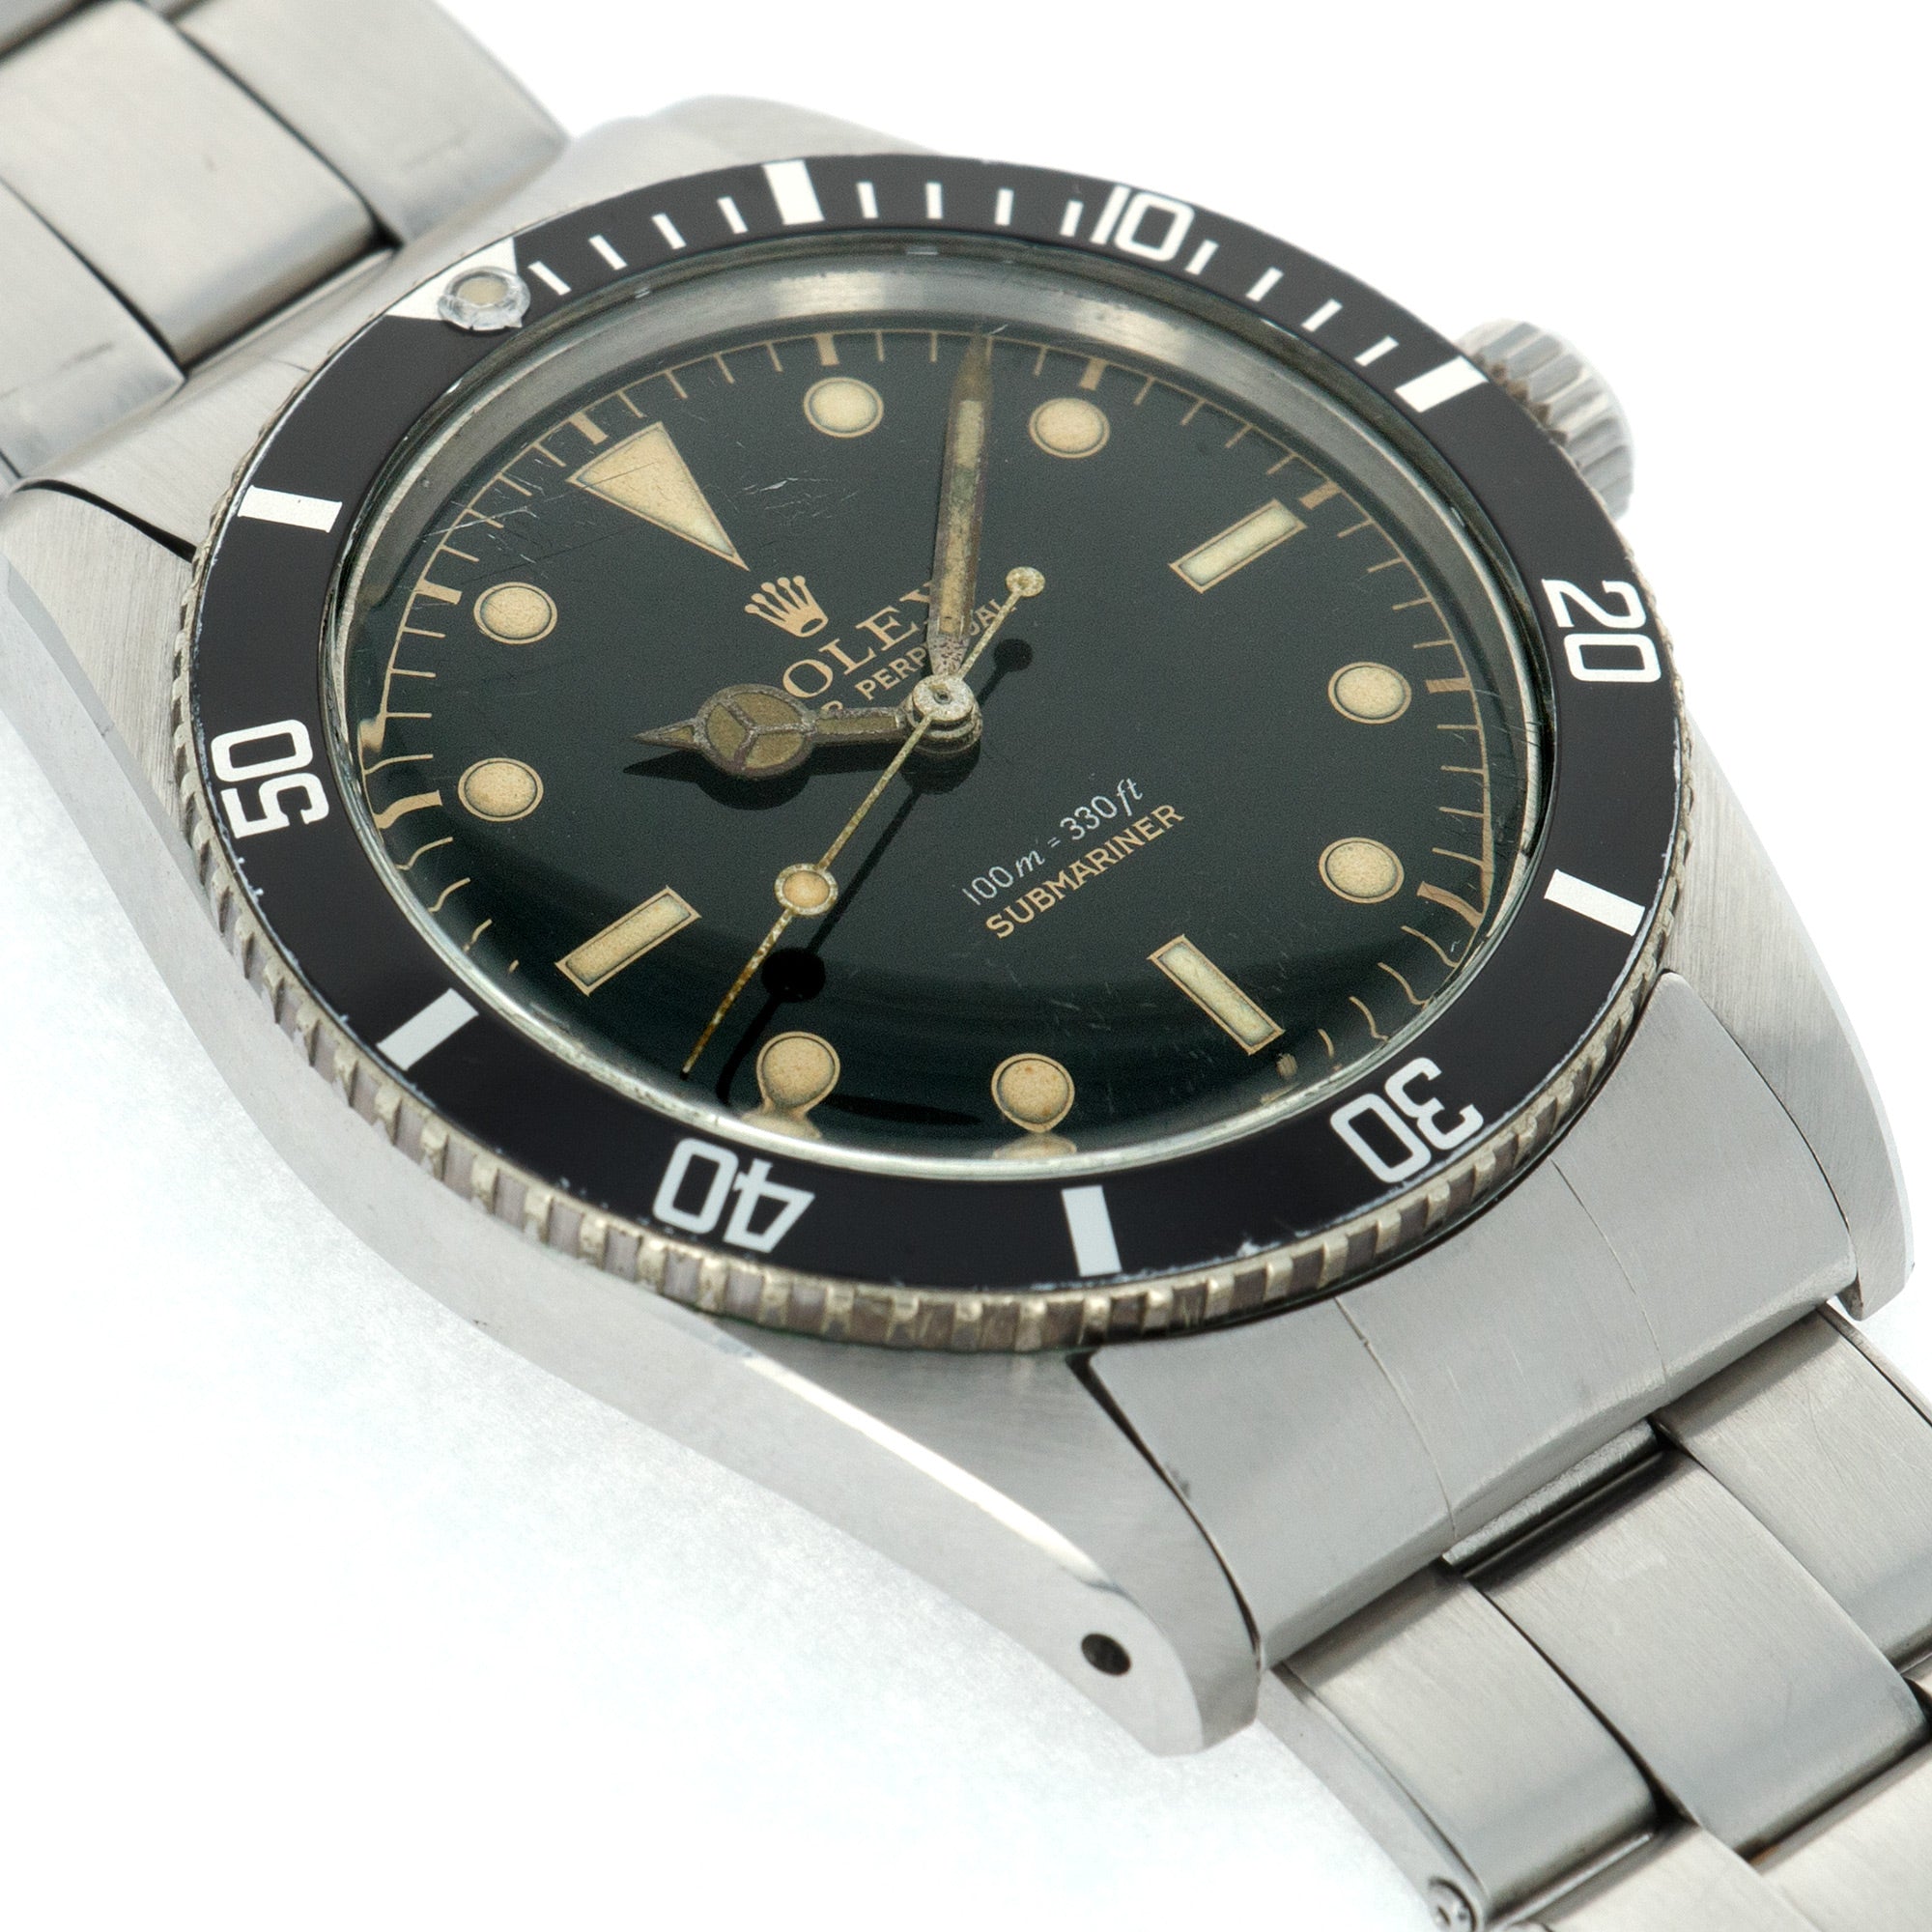 Rolex - Rolex No Crown Guards Submariner Watch Ref. 5508 with Original Exclamation Point Dial - The Keystone Watches